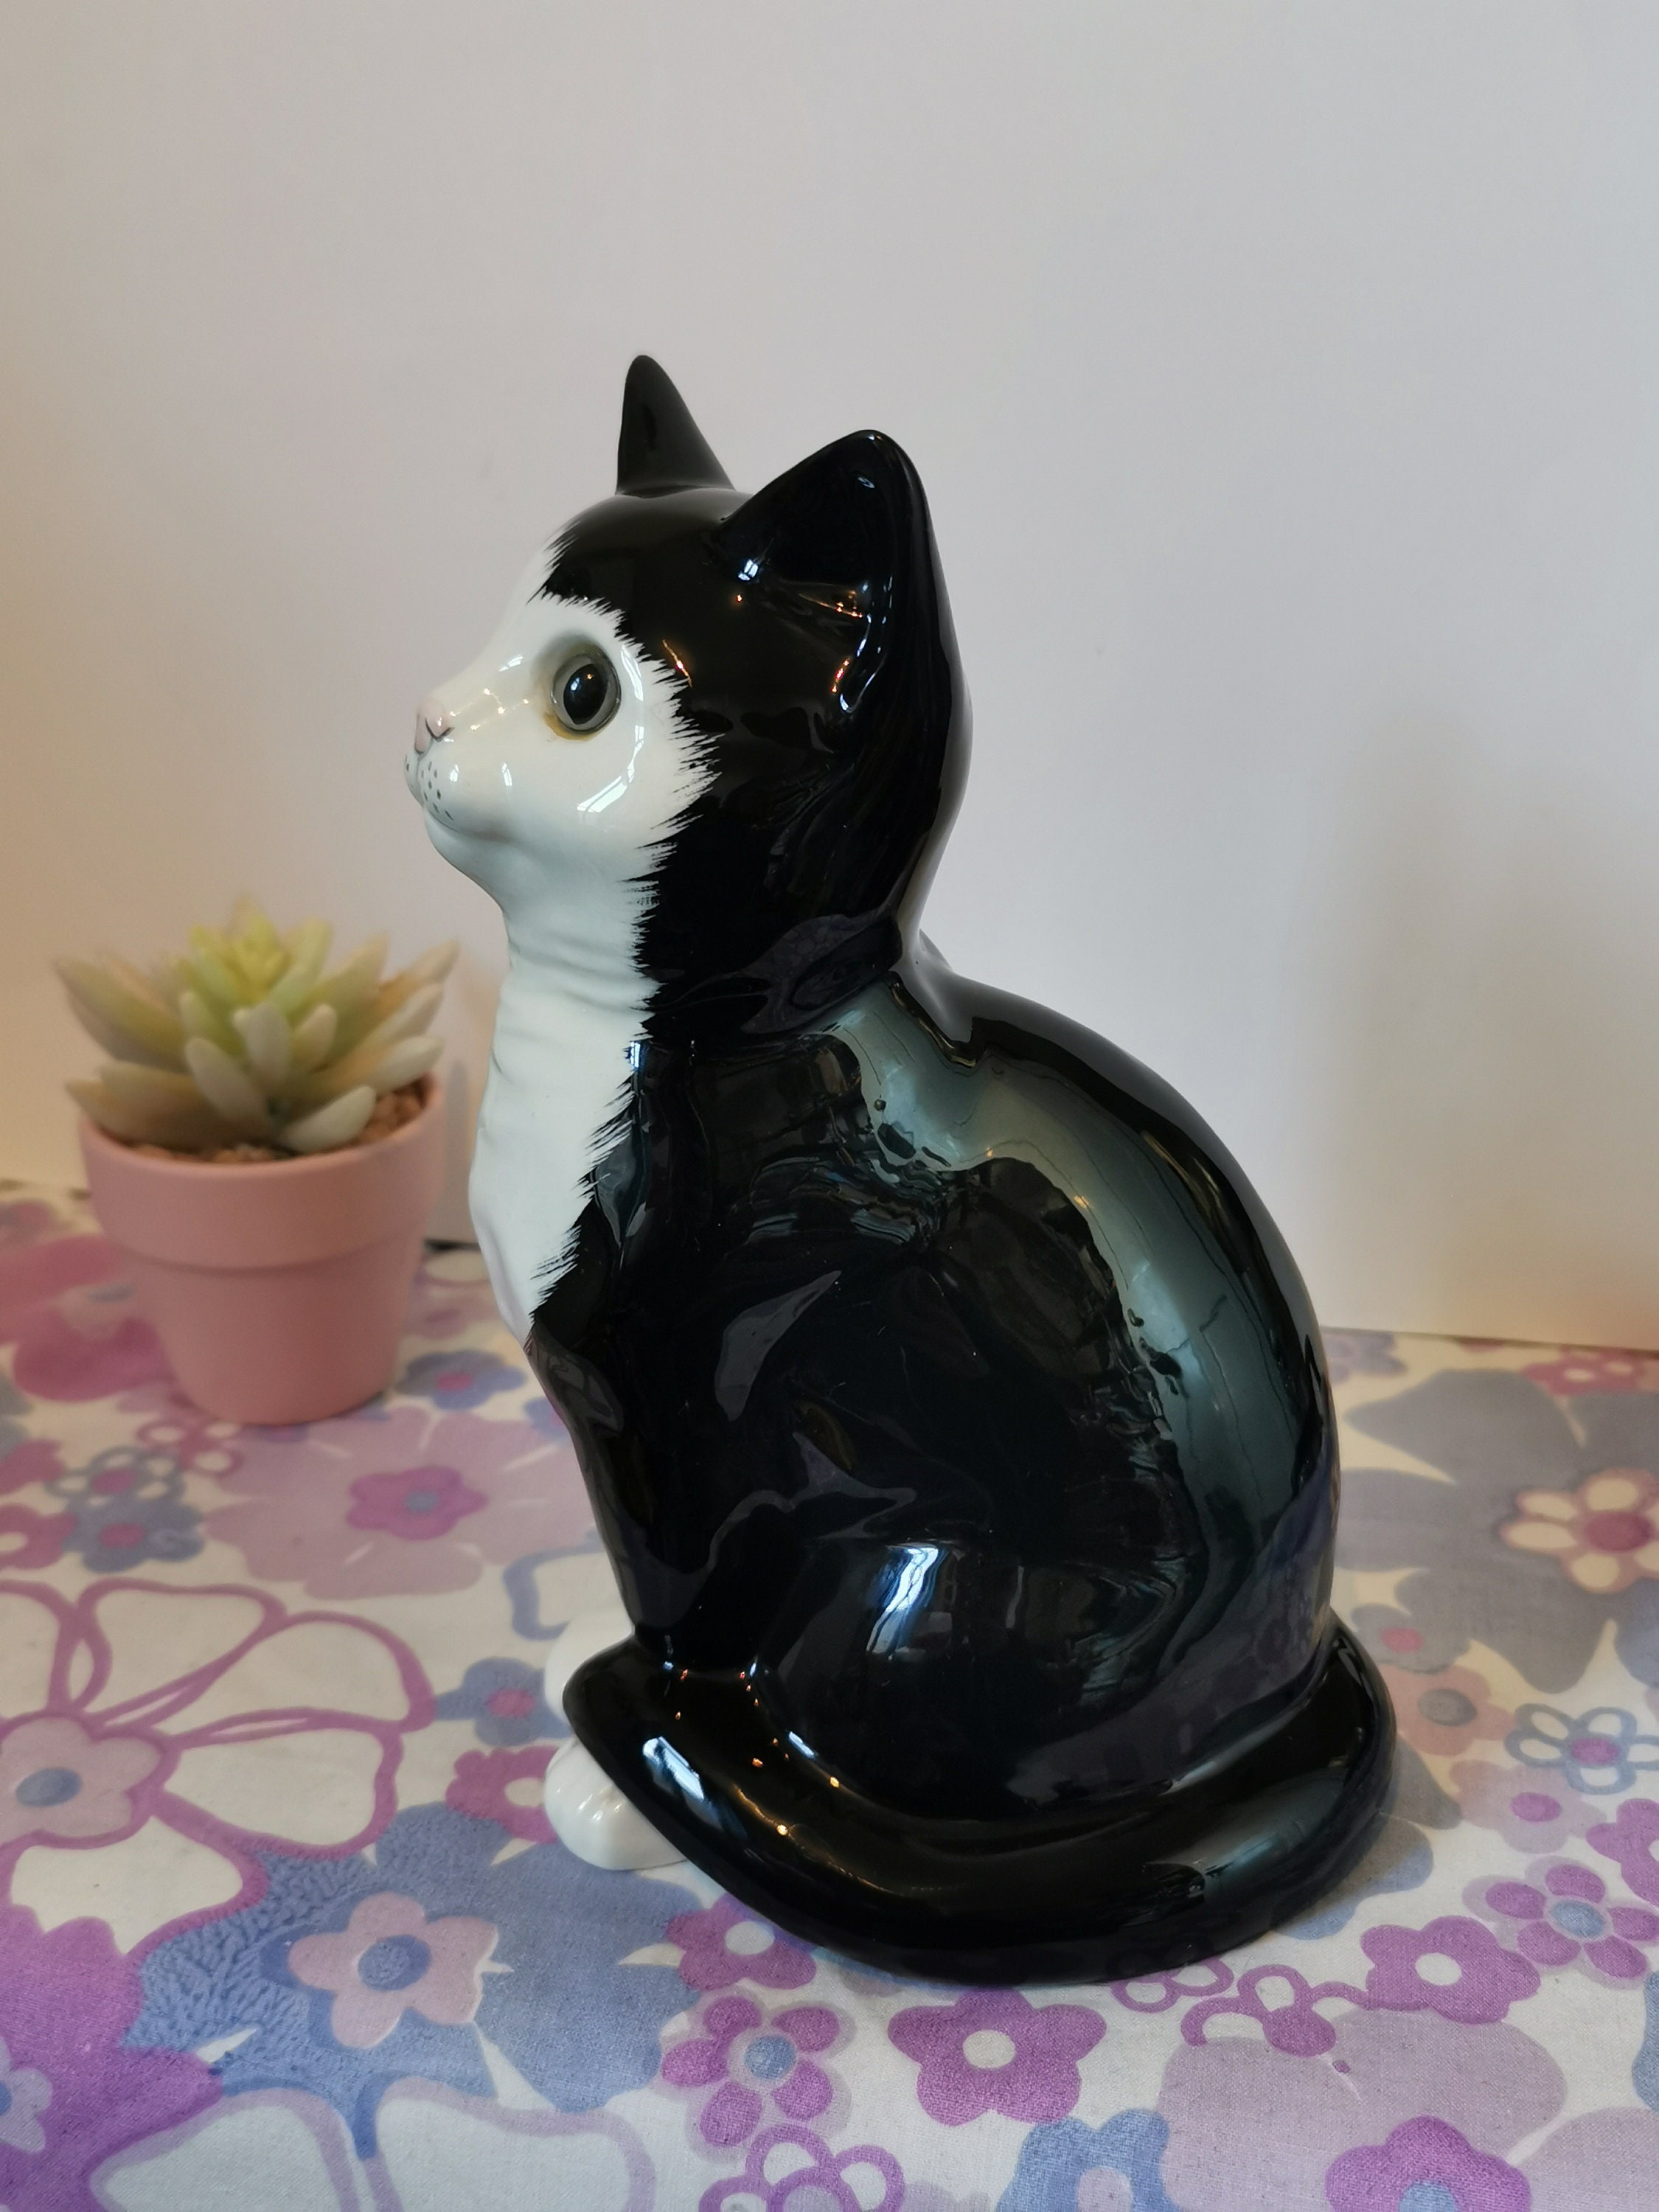 Gorgeous TUXEDO CAT Vintage FIGURINE by Just Cats & Co, Large Ceramic Black  and White Cat Ornament, Glass Eyes, Crazy Cat Lady Home Decor -  UK